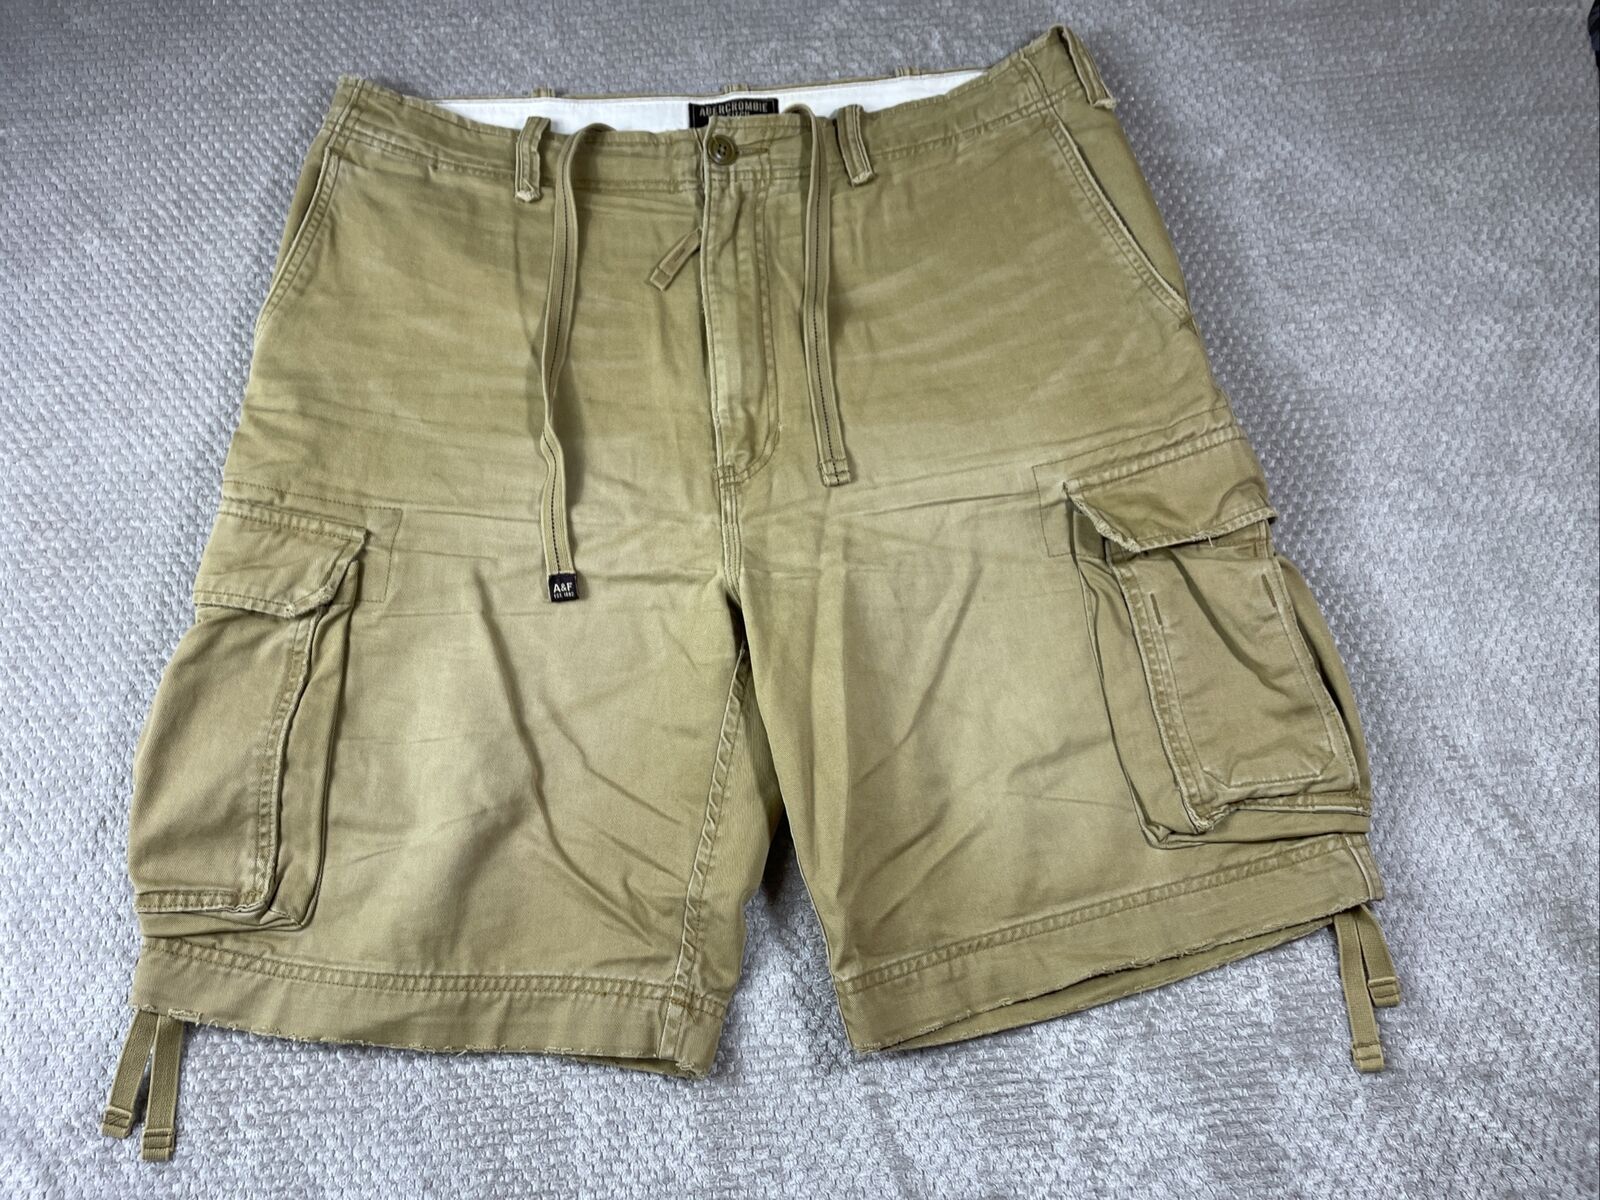 VINTAGE Abercrombie & Fitch Mens Cargo Shorts Size 36 Distressed Beige Y2K Baggy